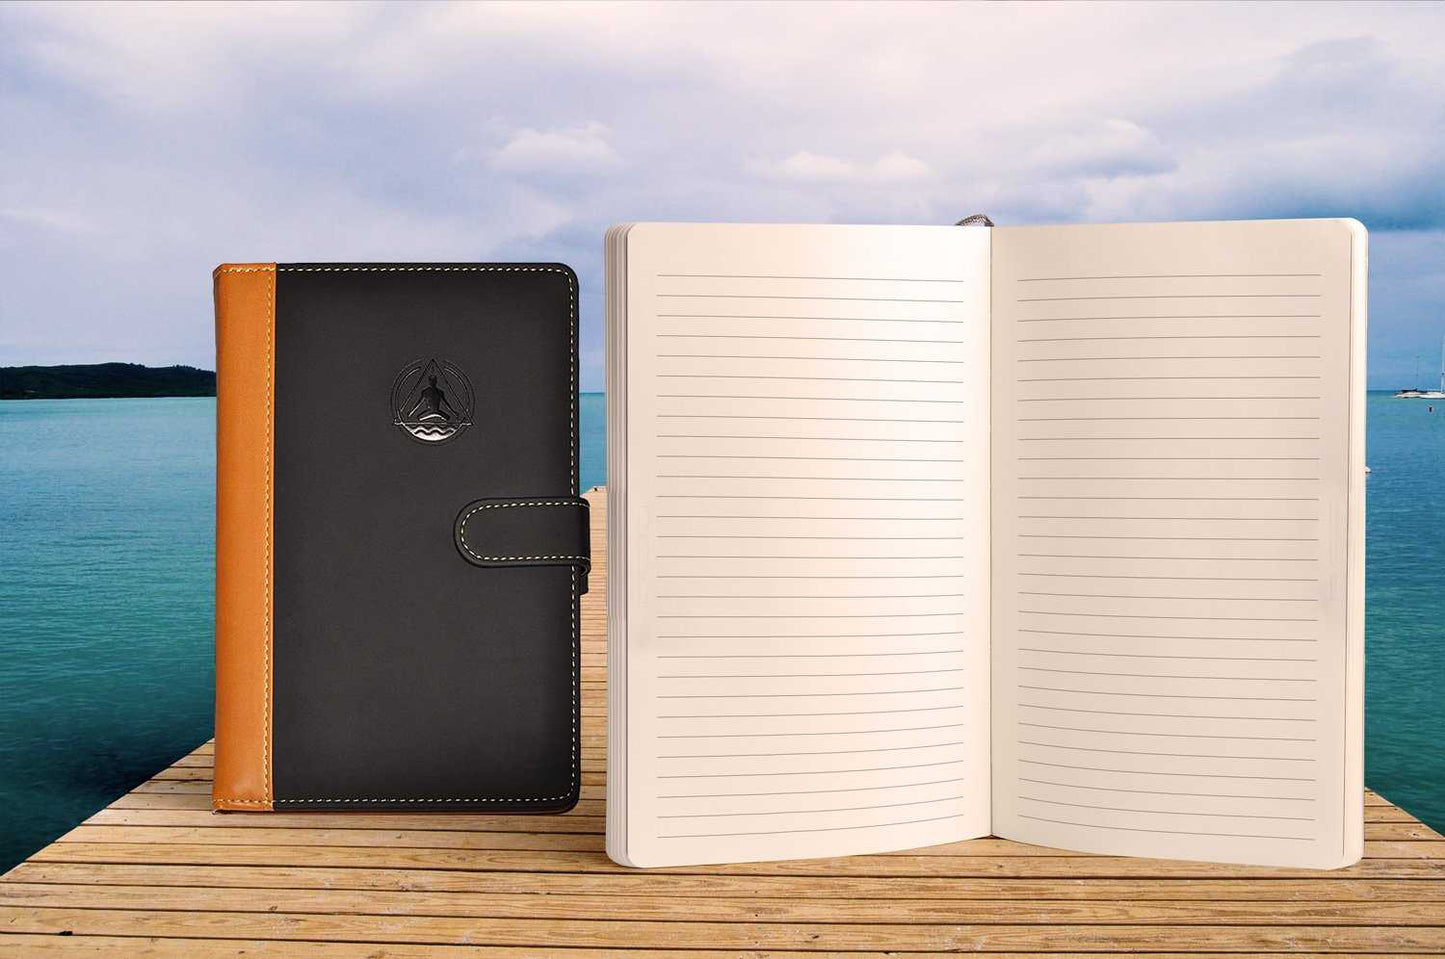 Best Lay-flat 180° Notebook Journal With Dotted Grid & Lined Ruled Pages | Perfect Diary Agenda For Writing, Drawing & Taking Notes | Deluxe Faux Leather Personal Organizer | A5 Sized (8.5" L x 6.1" W x 1.3" H) | Transcending Waves Planner